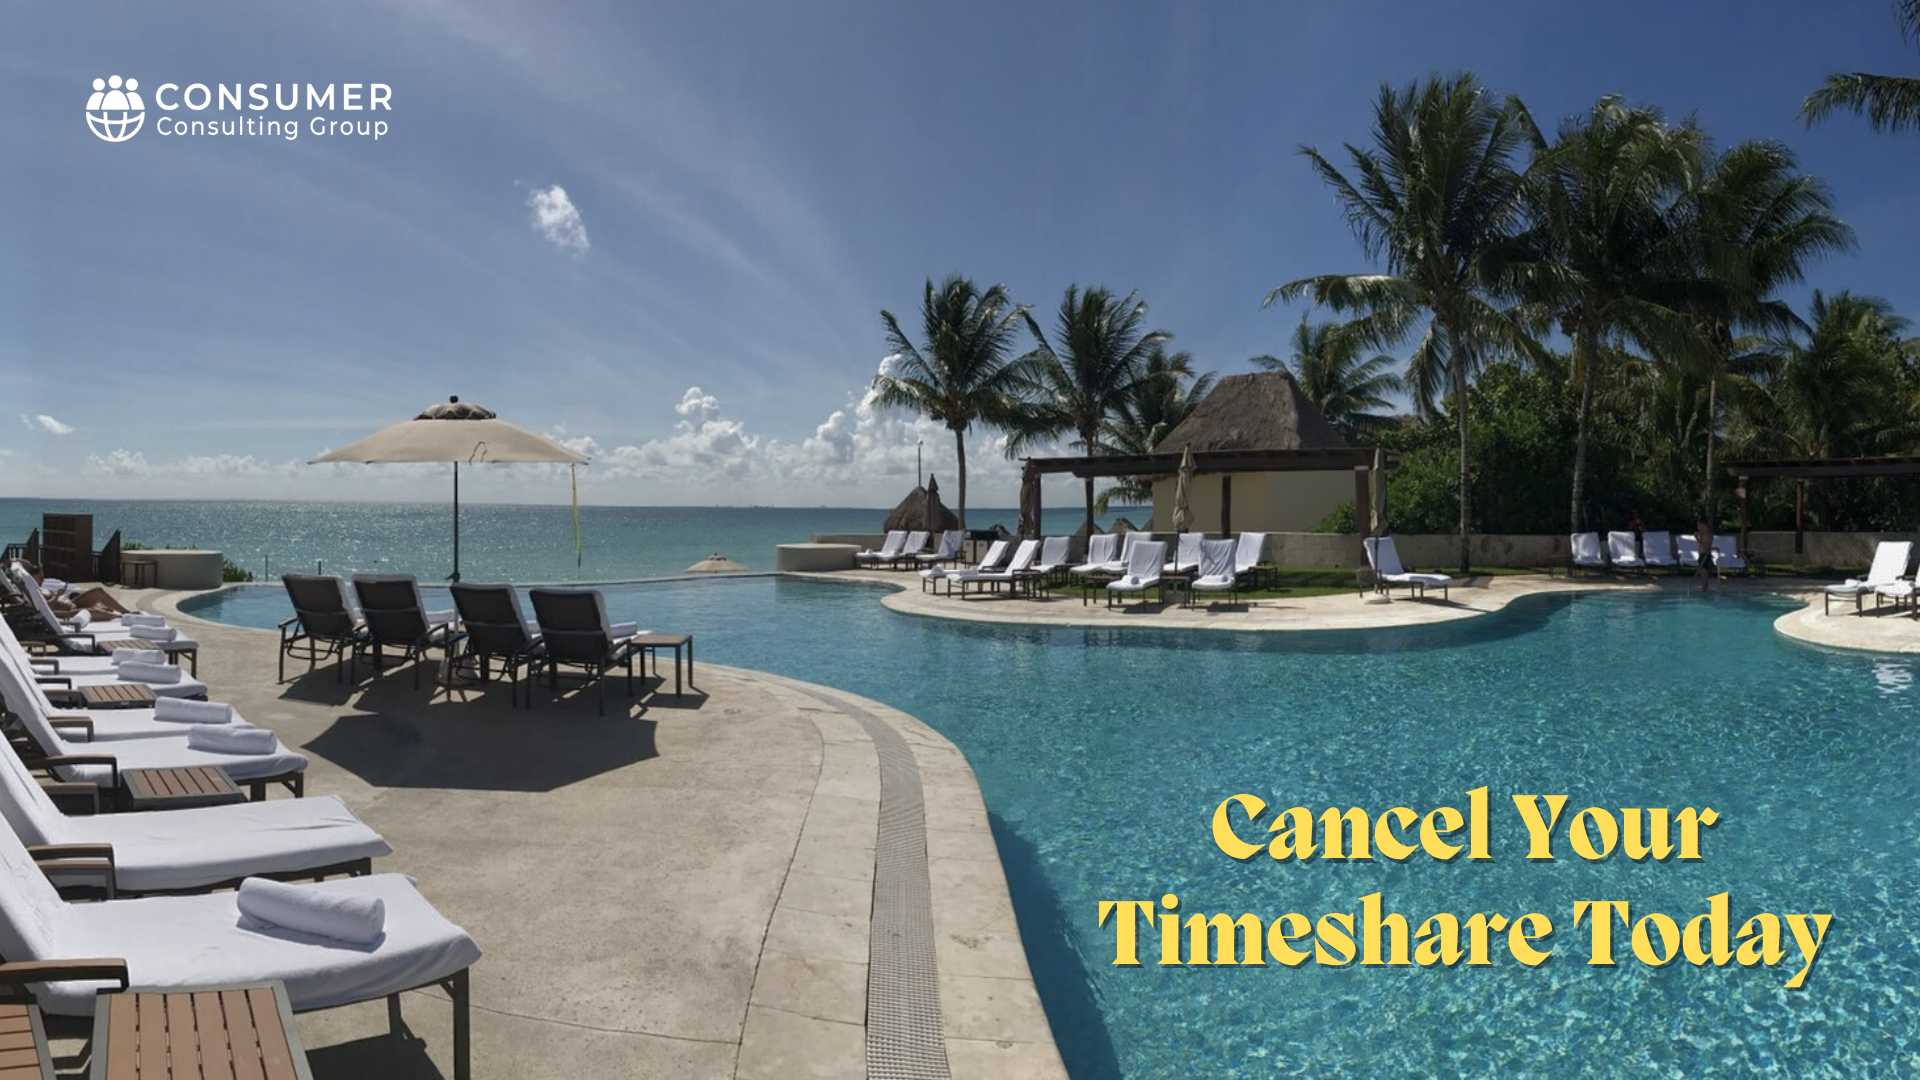 Cancel Your Timeshare Today